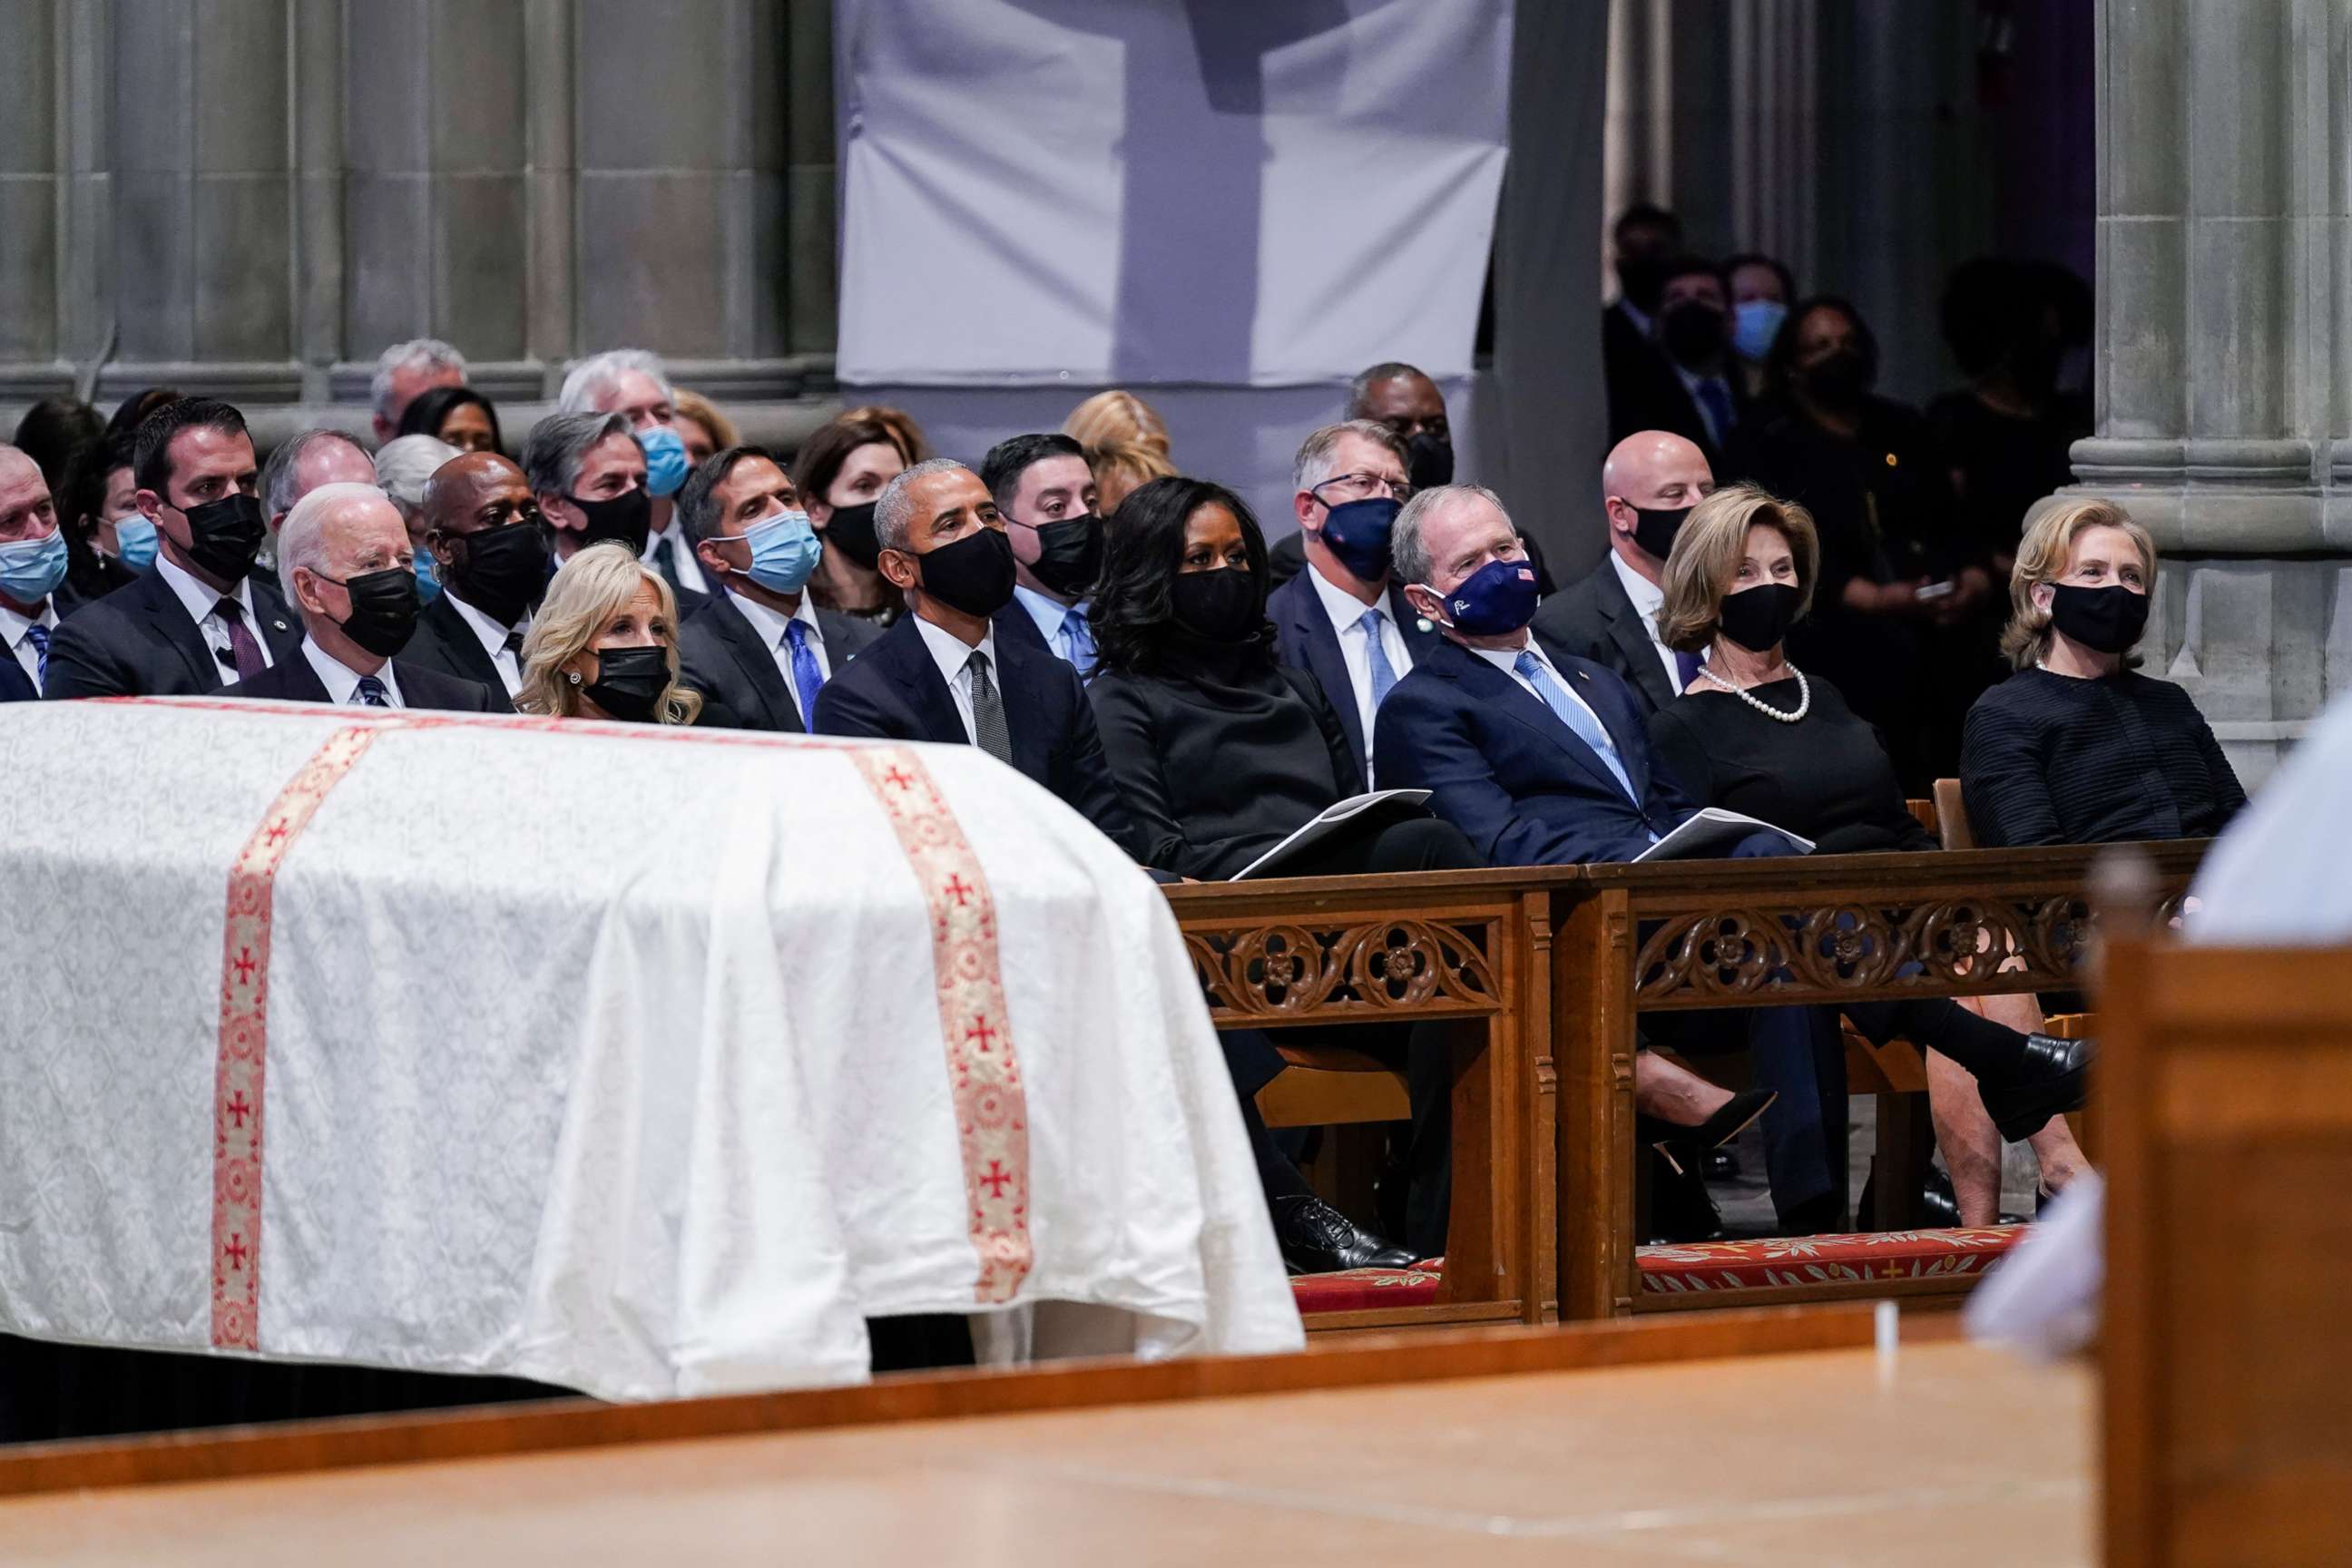 PHOTO: President Joe Biden, first lady Jill Biden, former President Barack Obama, former first lady Michelle Obama, former President George W. Bush, Laura Bush and former Secretary of State Hillary Clinton listen during the funeral for Colin Powell.